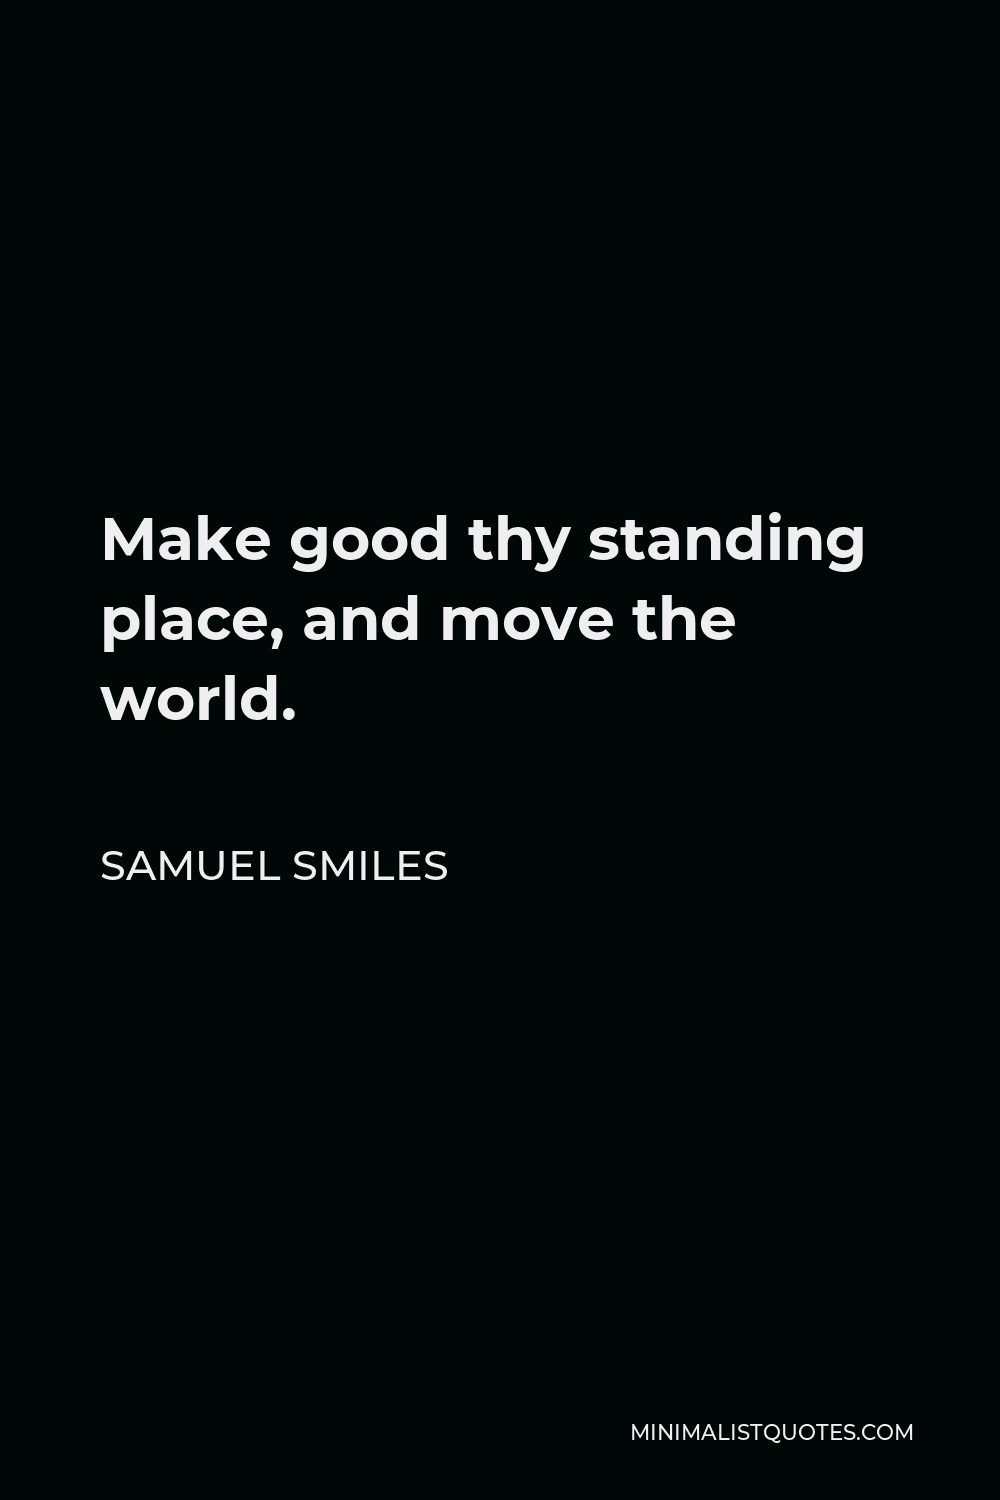 Samuel Smiles Quote - Make good thy standing place, and move the world.